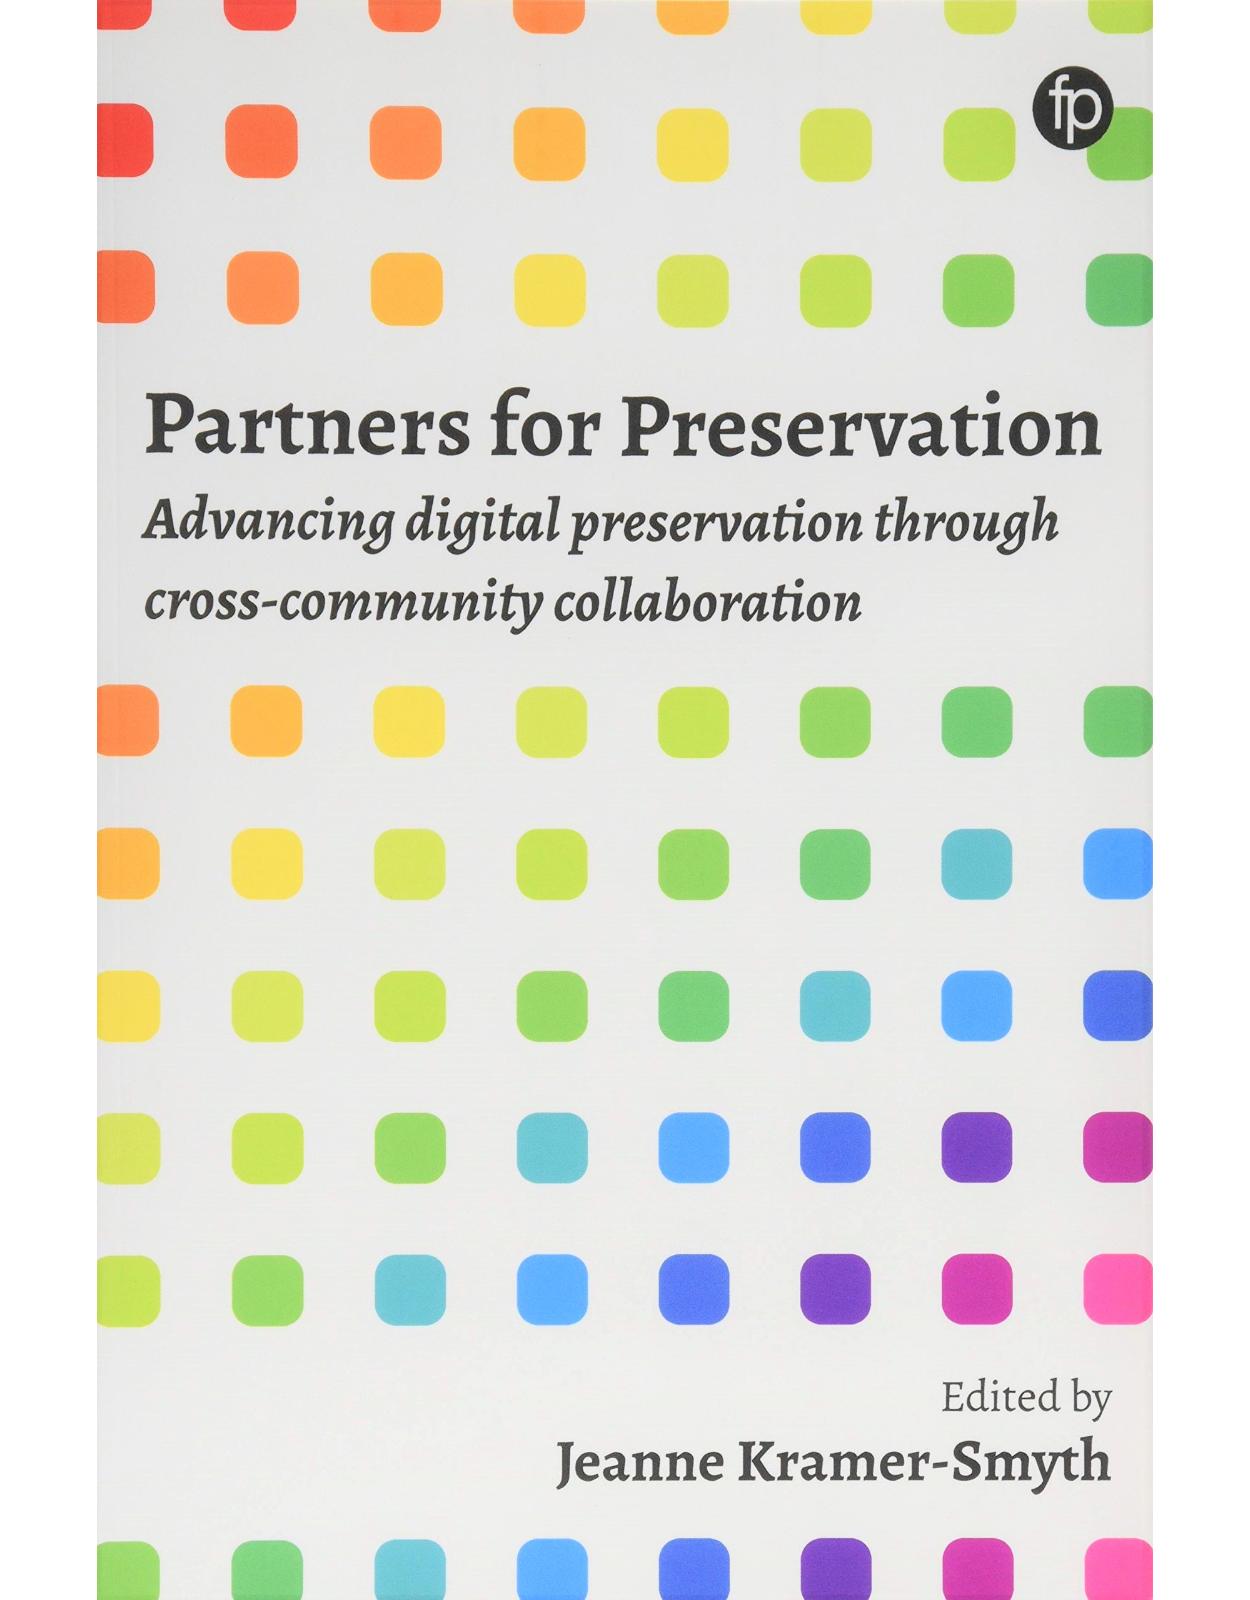 Partners for Preservation: Advancing digital preservation through cross-community collaboration